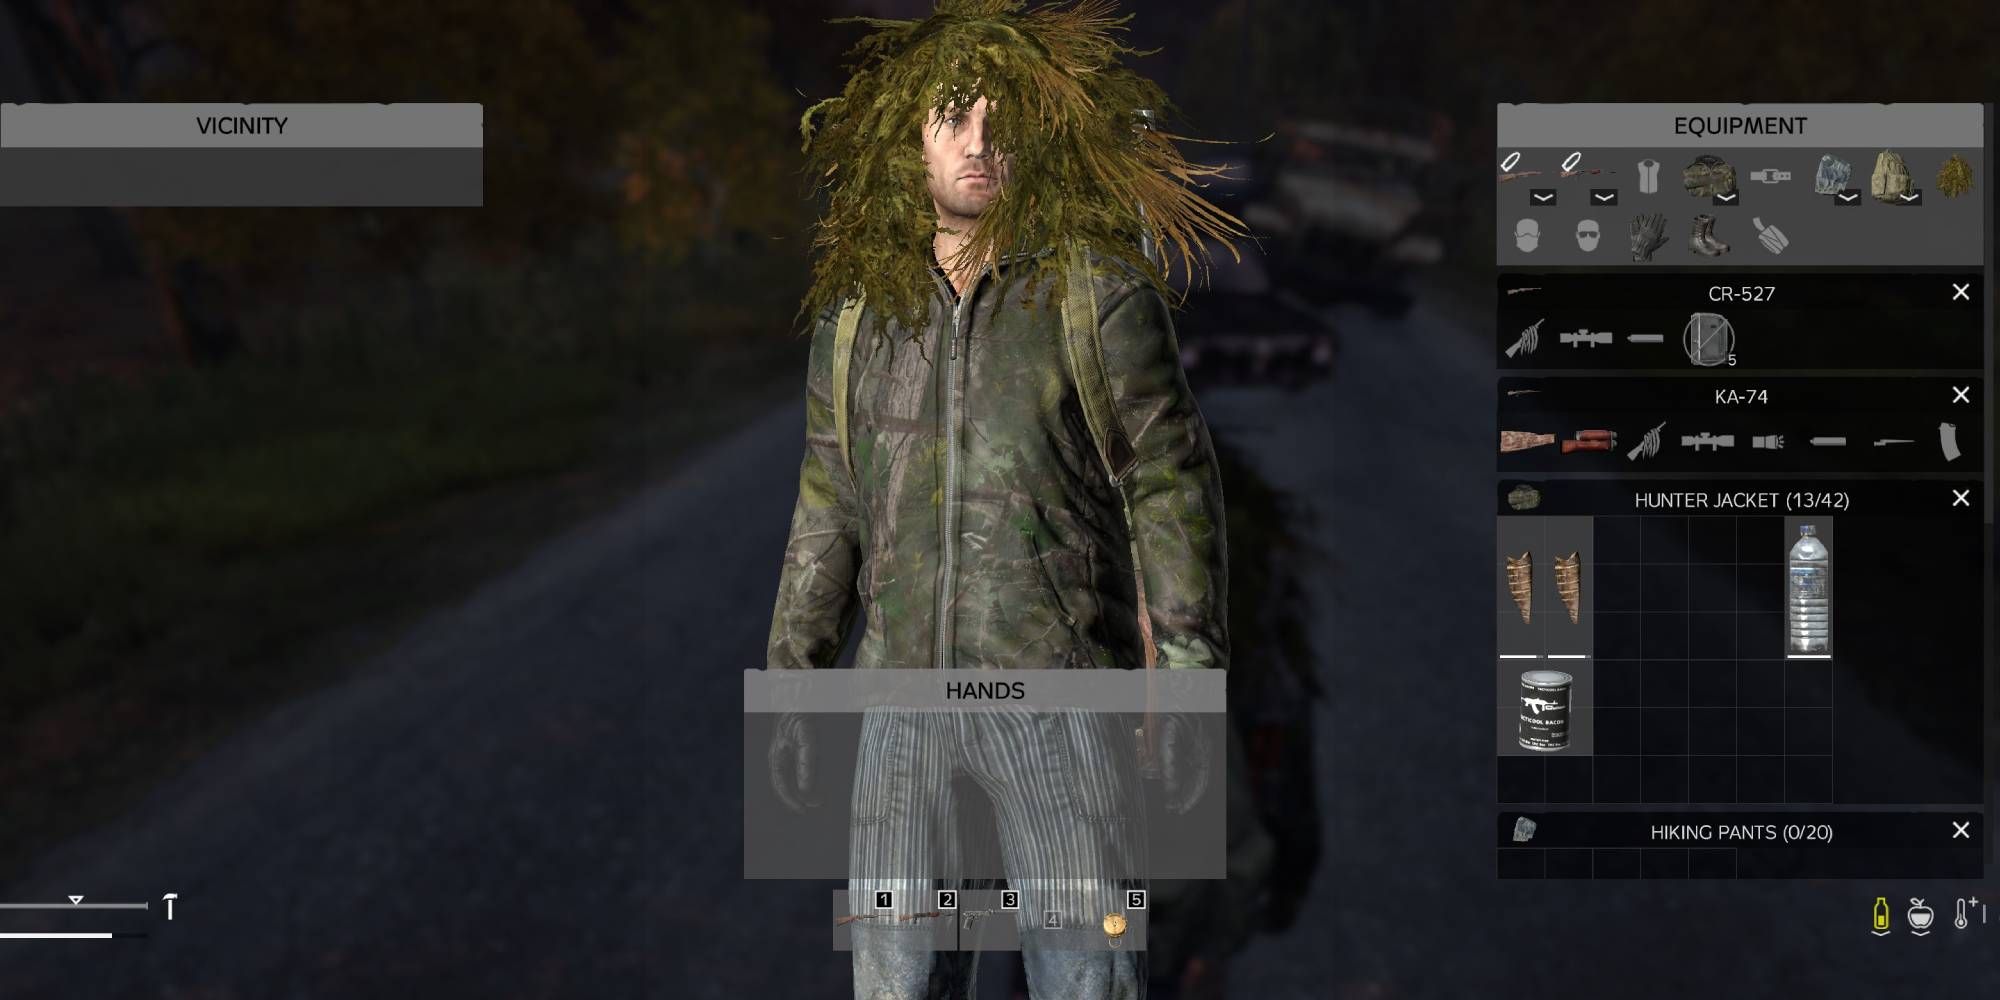 DayZ: Screenshot of the player Inventory screen, showing clothing and items